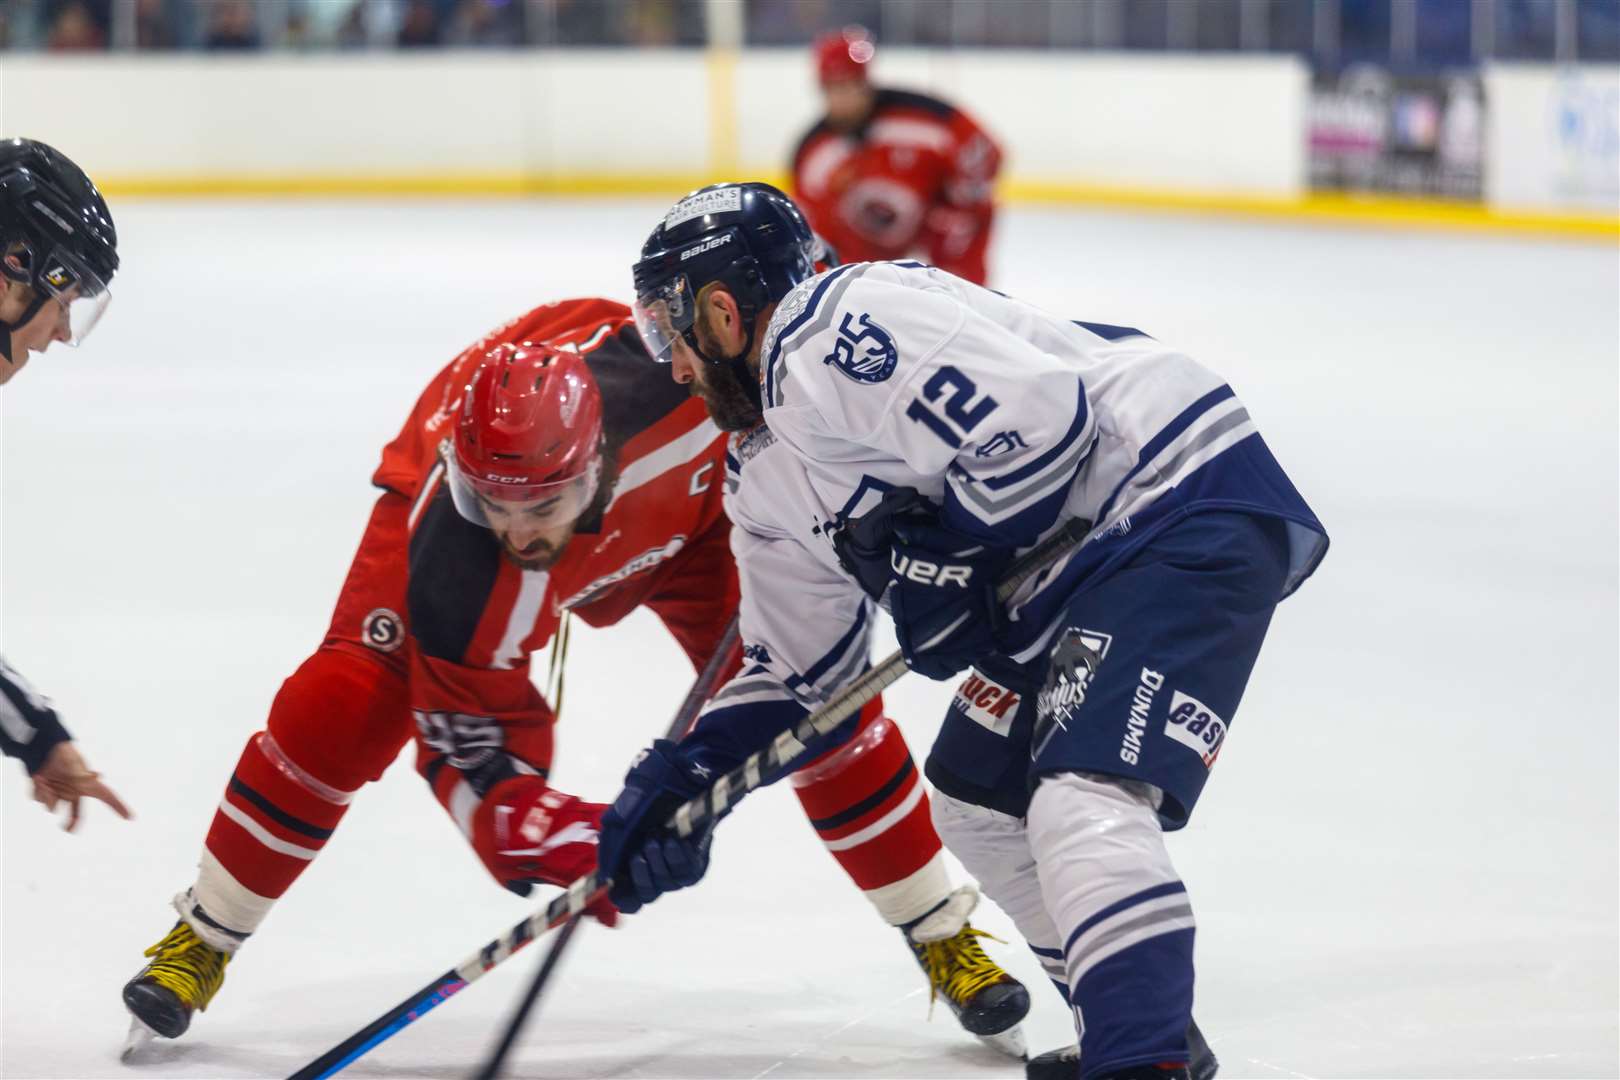 Karl Lennon in action for Invicta Dynamos against Streatham last October. Picture: David Trevallion